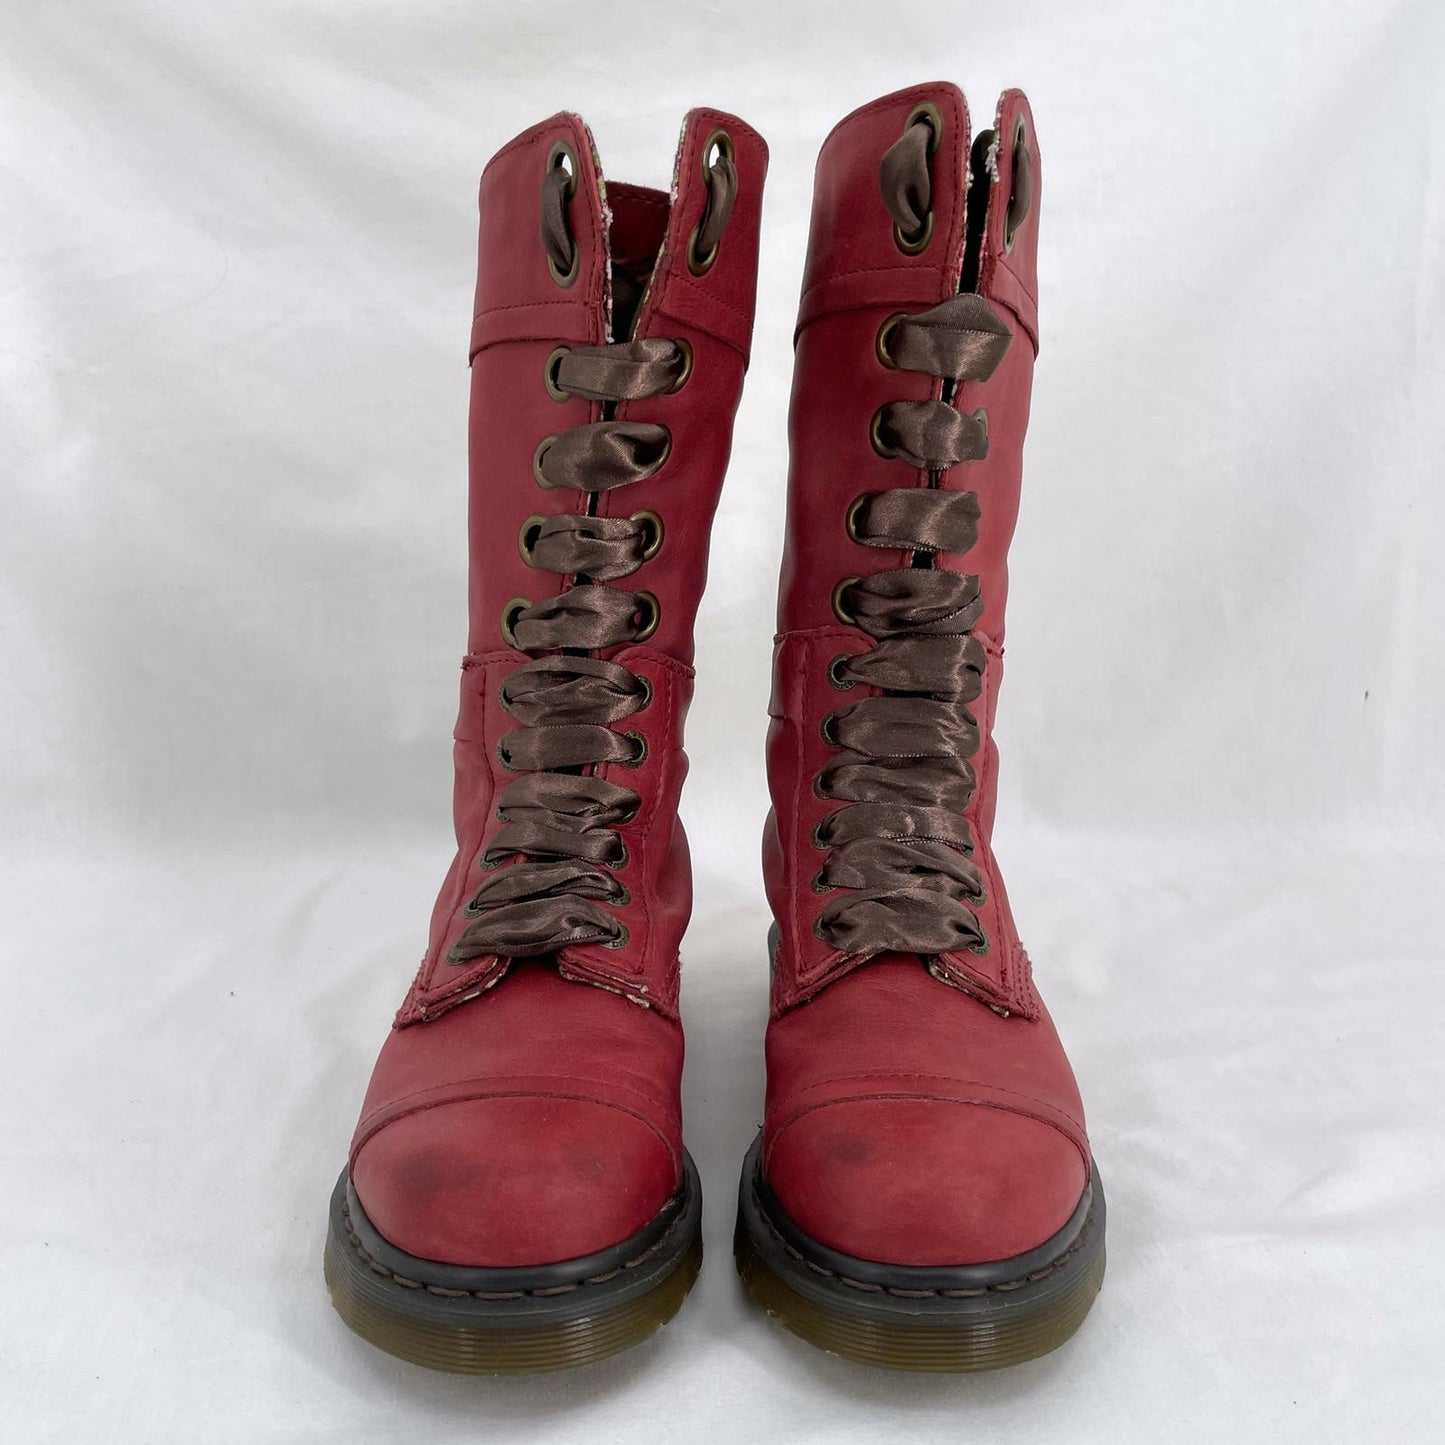 Dr. Martens Triumph Boots Red Oxblood Leather Pirate Fold Down Floral Boots US Size 7